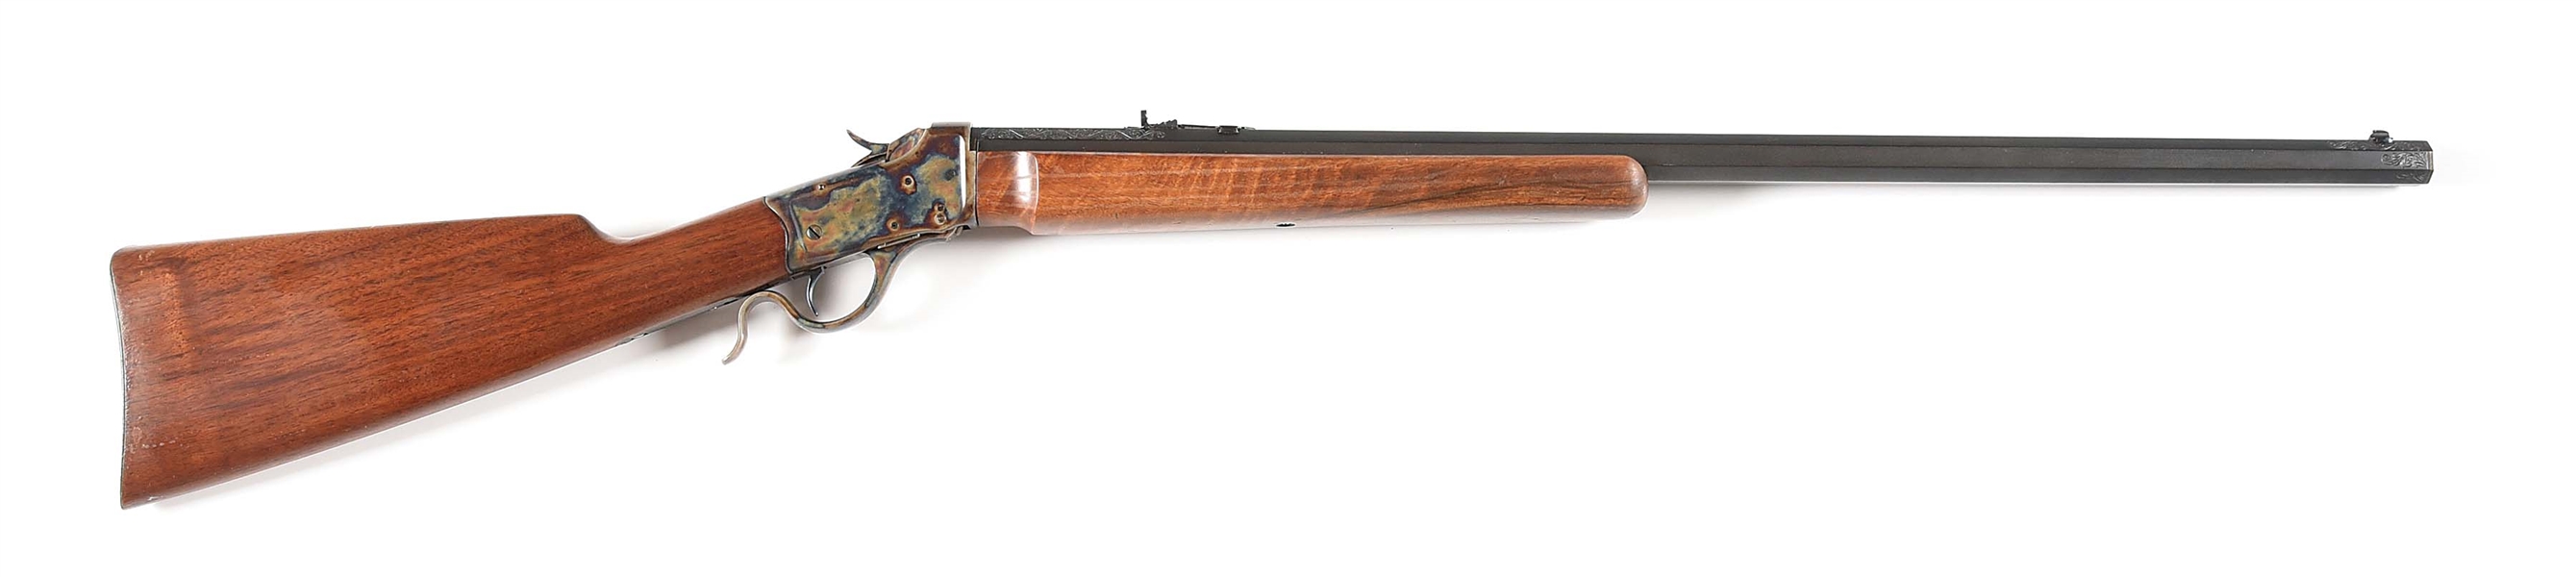 (C) ATTRACTIVELY RESTORED U.S. MARKED WINCHESTER MODEL 1885 LOW-WALL .410 BORE SINGLE SHOT SHOTGUN.